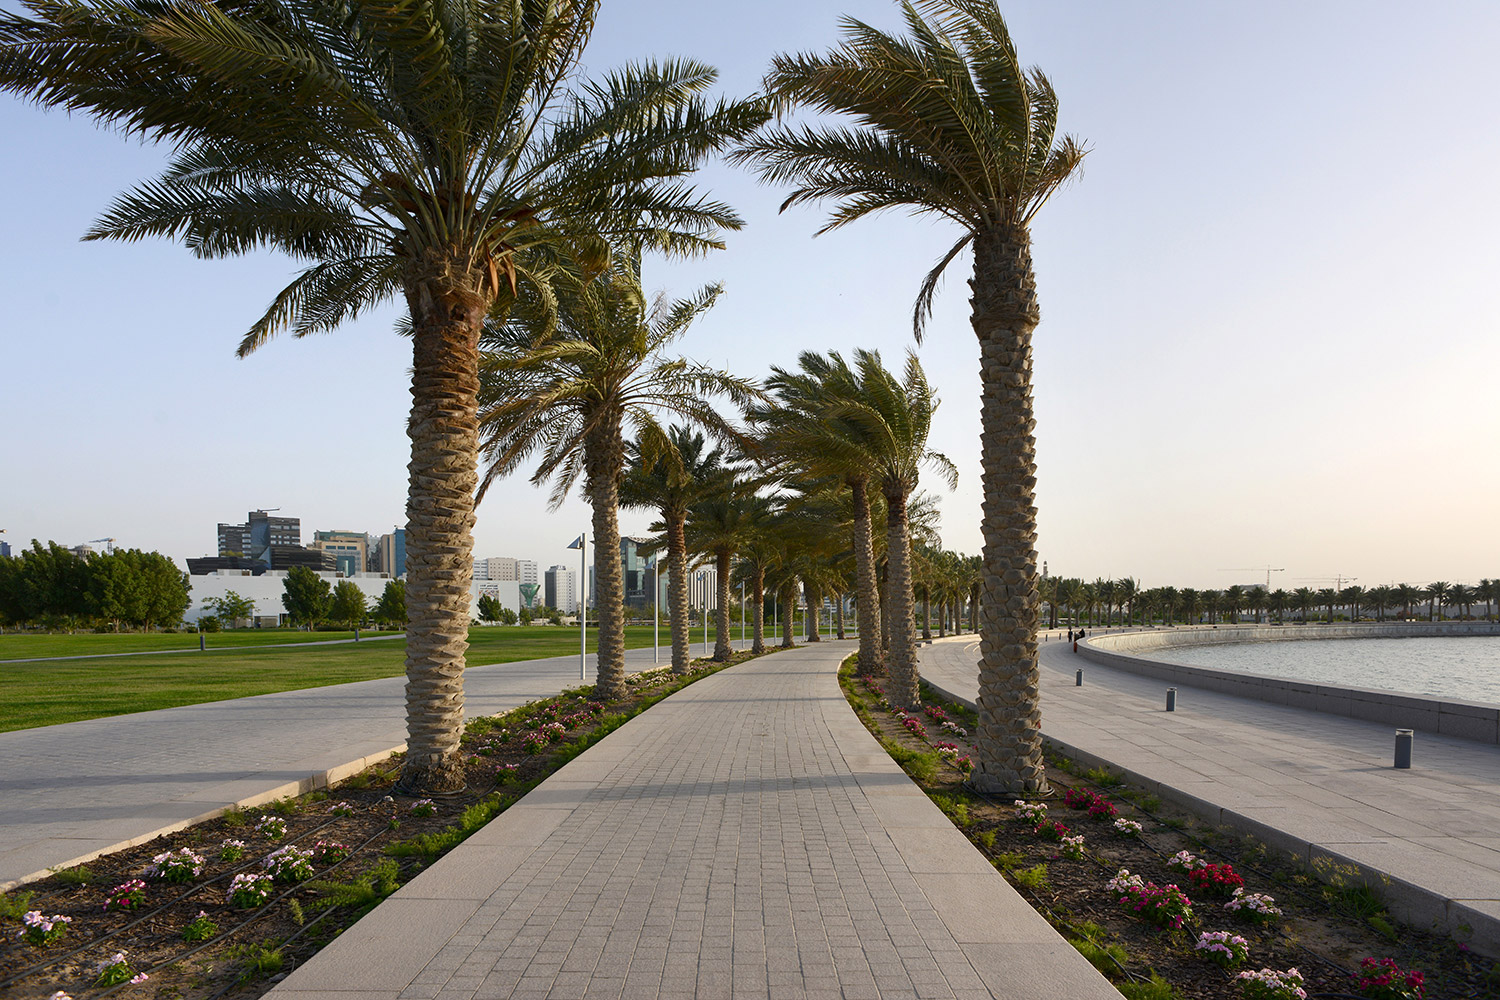 The park has 5 Km of lighted pedestrian pathways shaded by native palm trees 